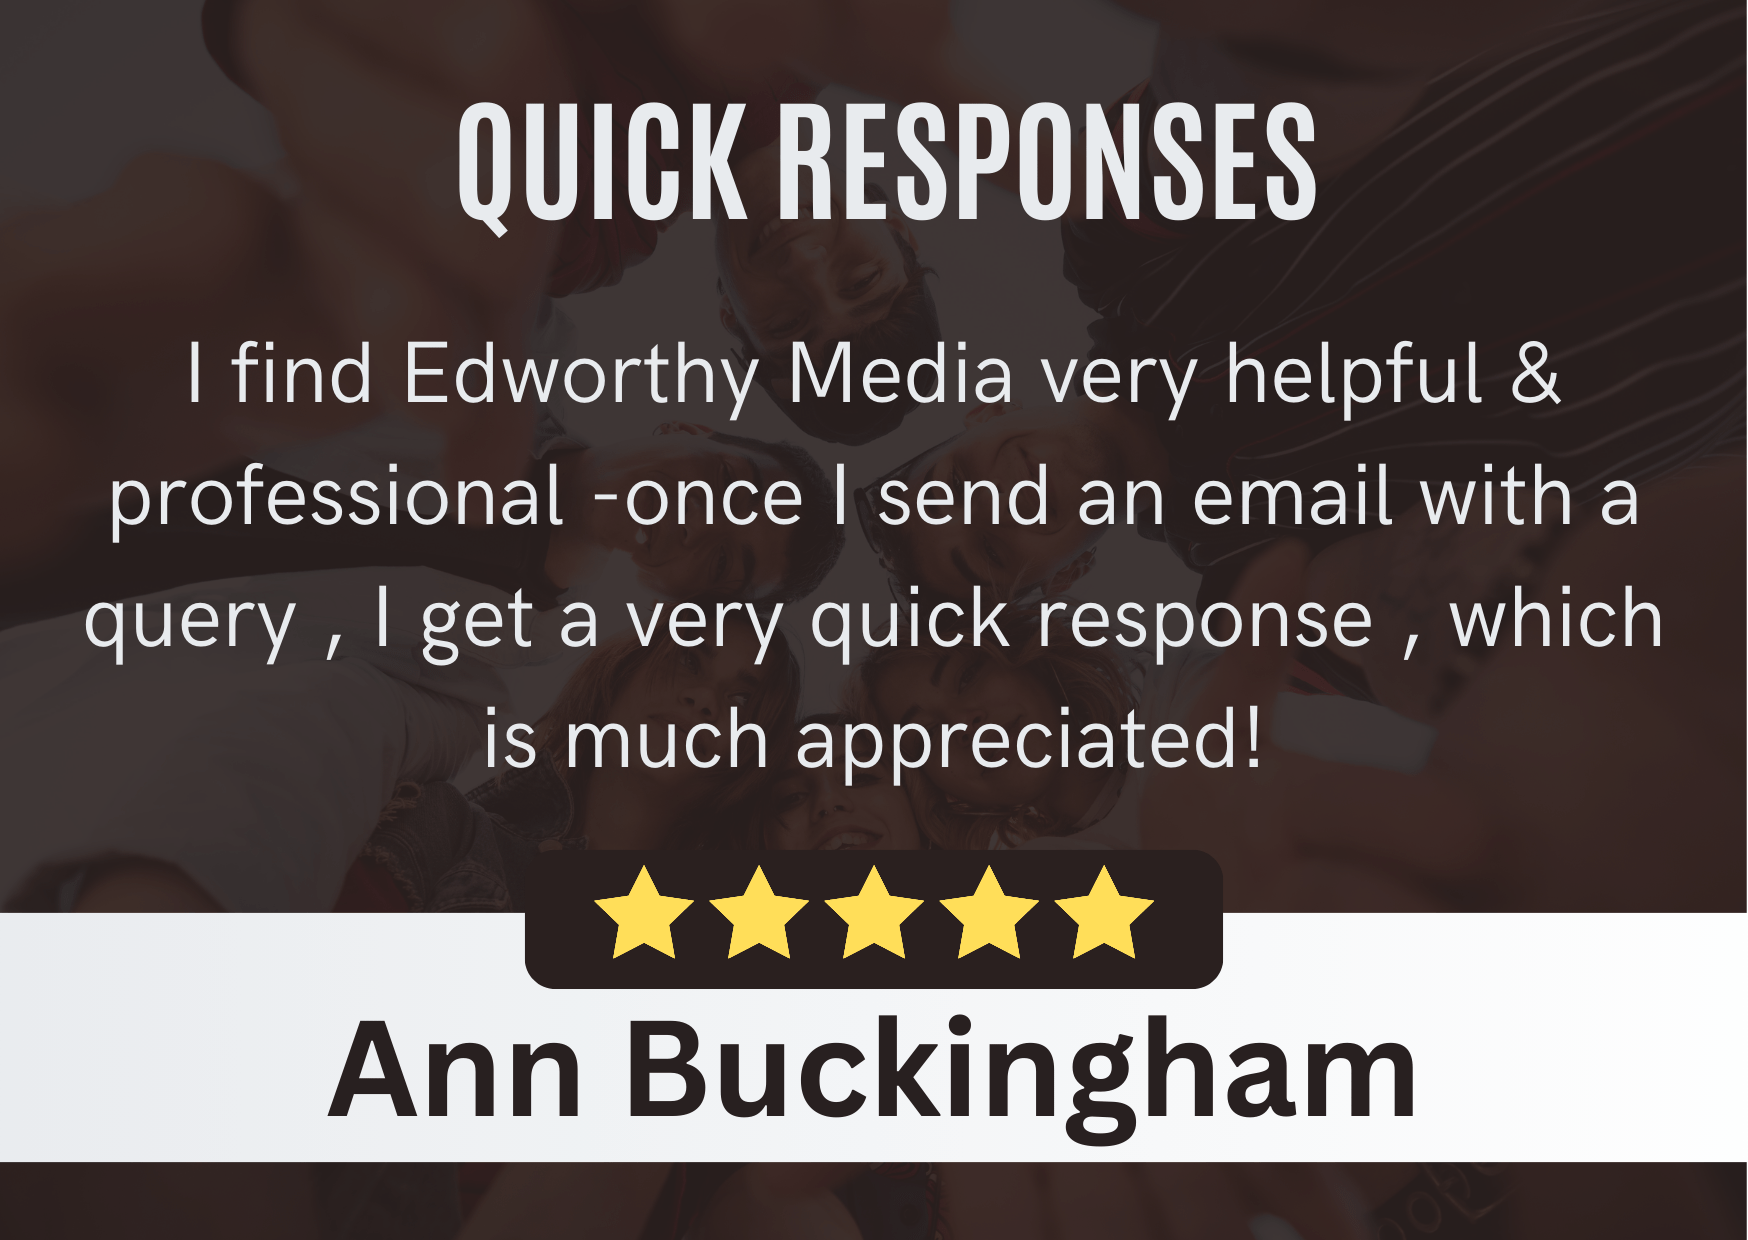 Ann Buckingham - Edworthy Media Review | PPC Agency Web management Services Exeter. Review Content: I find Edworthy media very helpful & professional. - Once I send and email with a query, I get a very quick response, which is much appreciated!